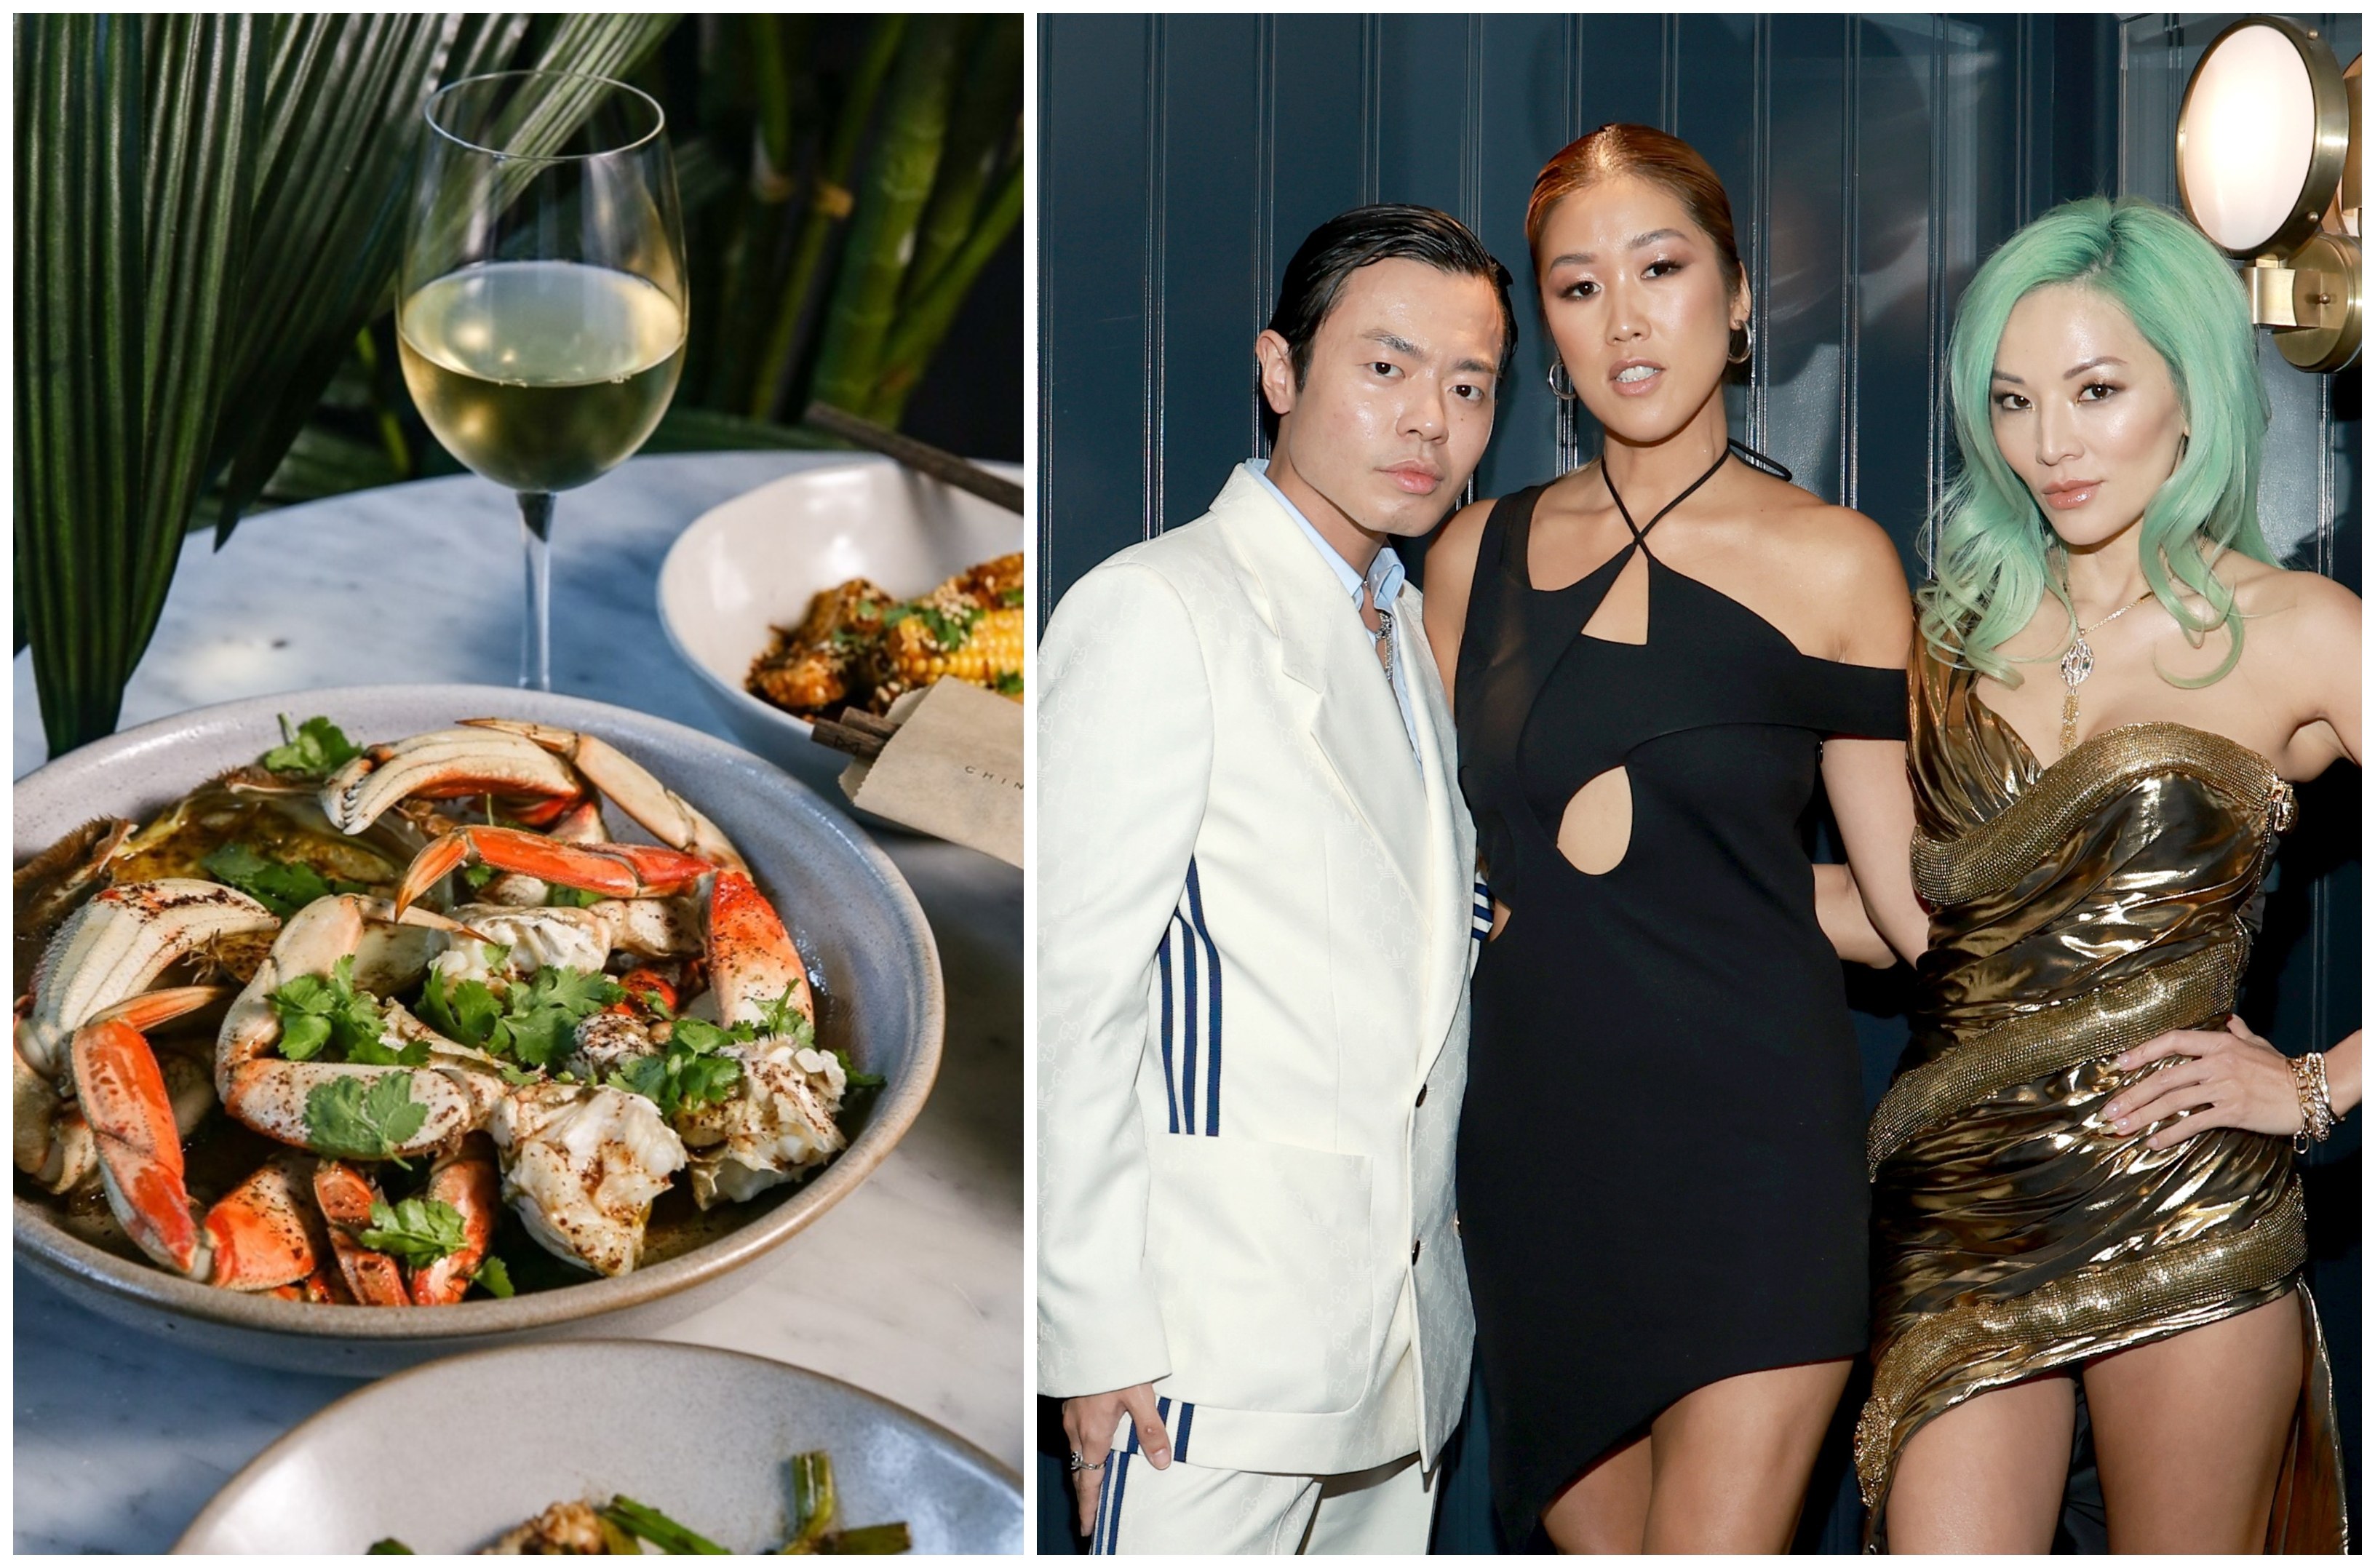 6 of New York’s best restaurants according to the Slaysians and the stars of Bling Empire: New York. Photos: Getty Images, Handout